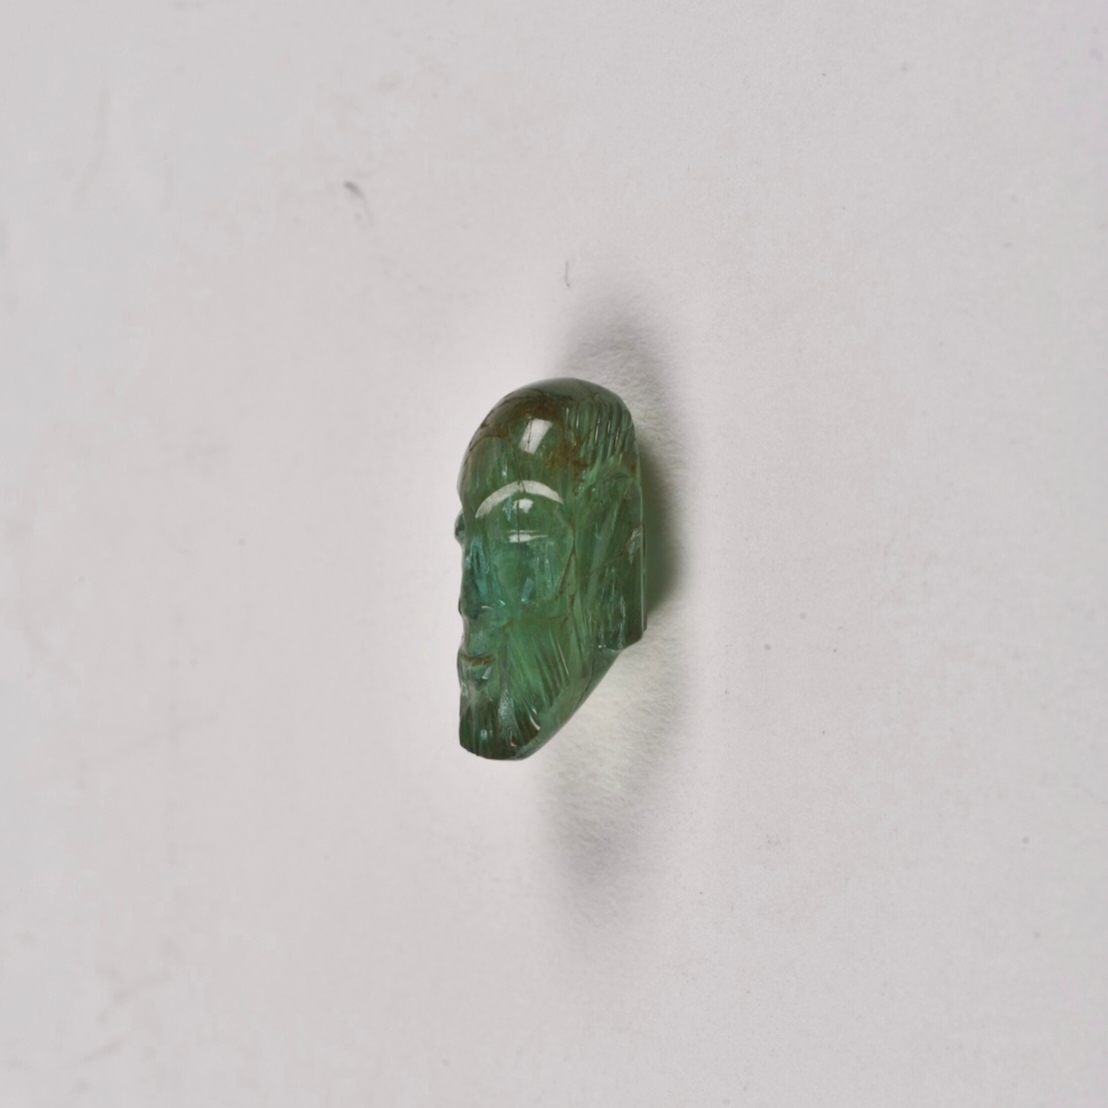 Historical Artifacts - Head carved out of emerald, 19th Century. On display at National Museum, New Delhi, India. u/1NbSHXj4